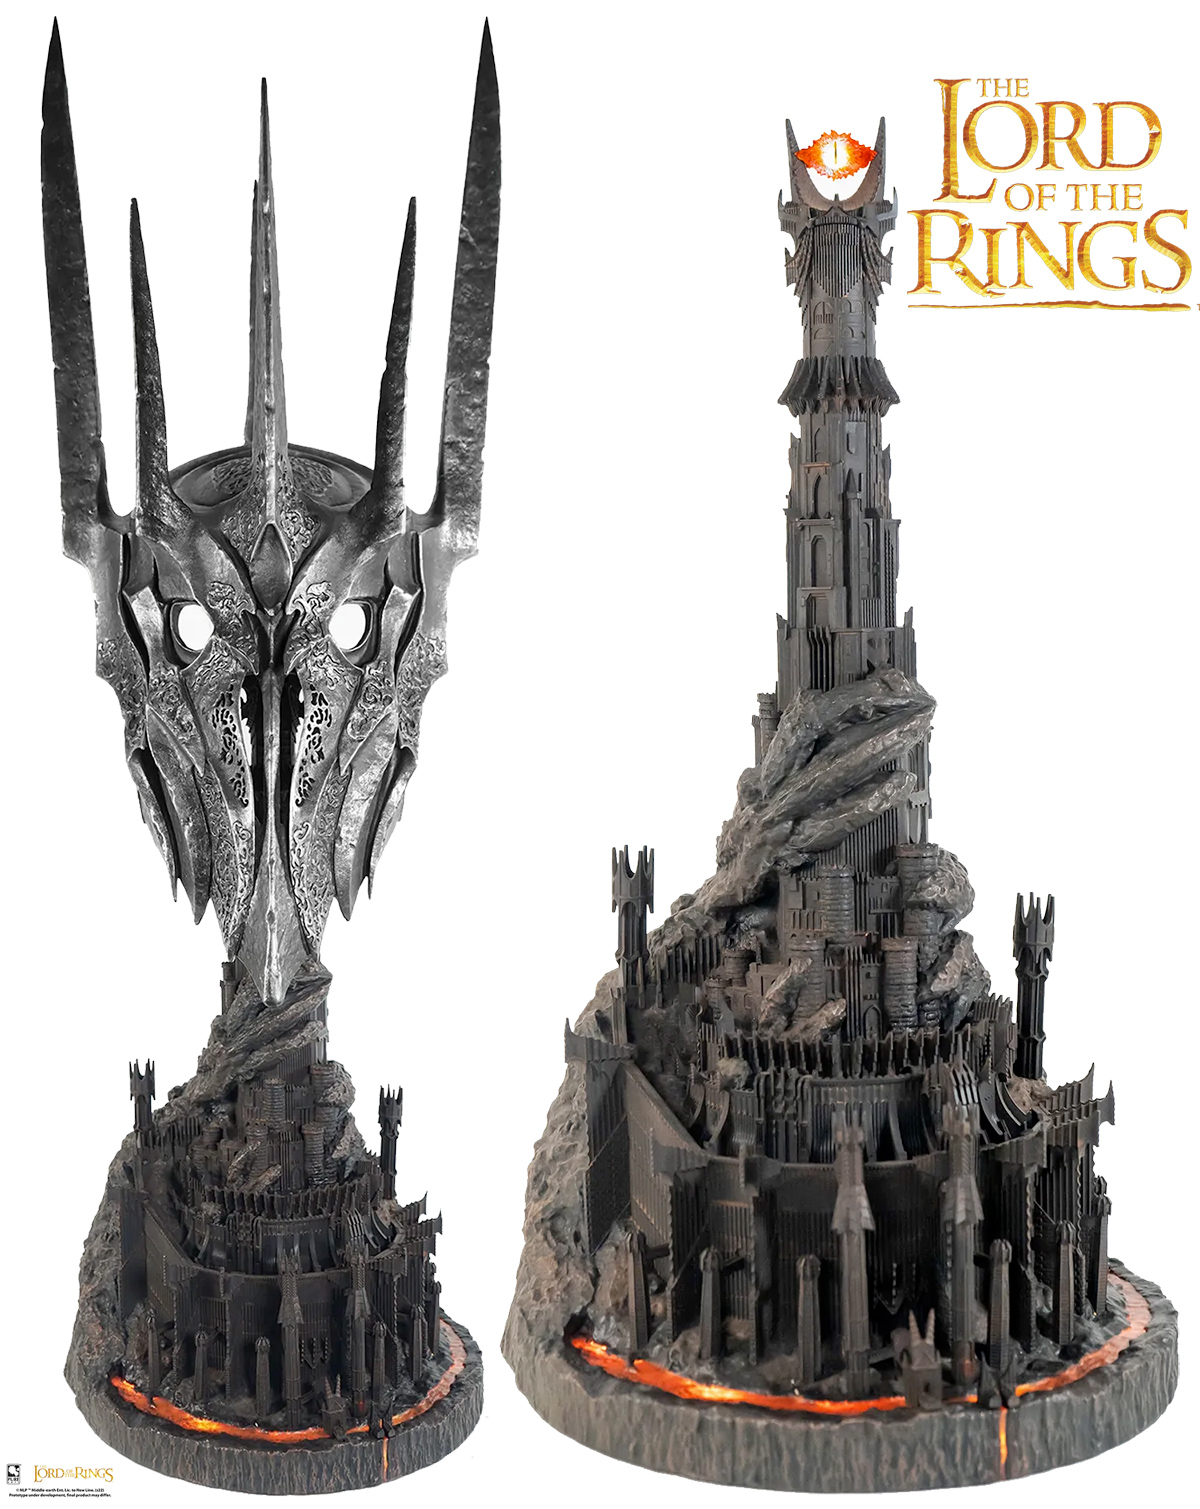 Capacetes Lord of the Rings 1:1 Art Mask